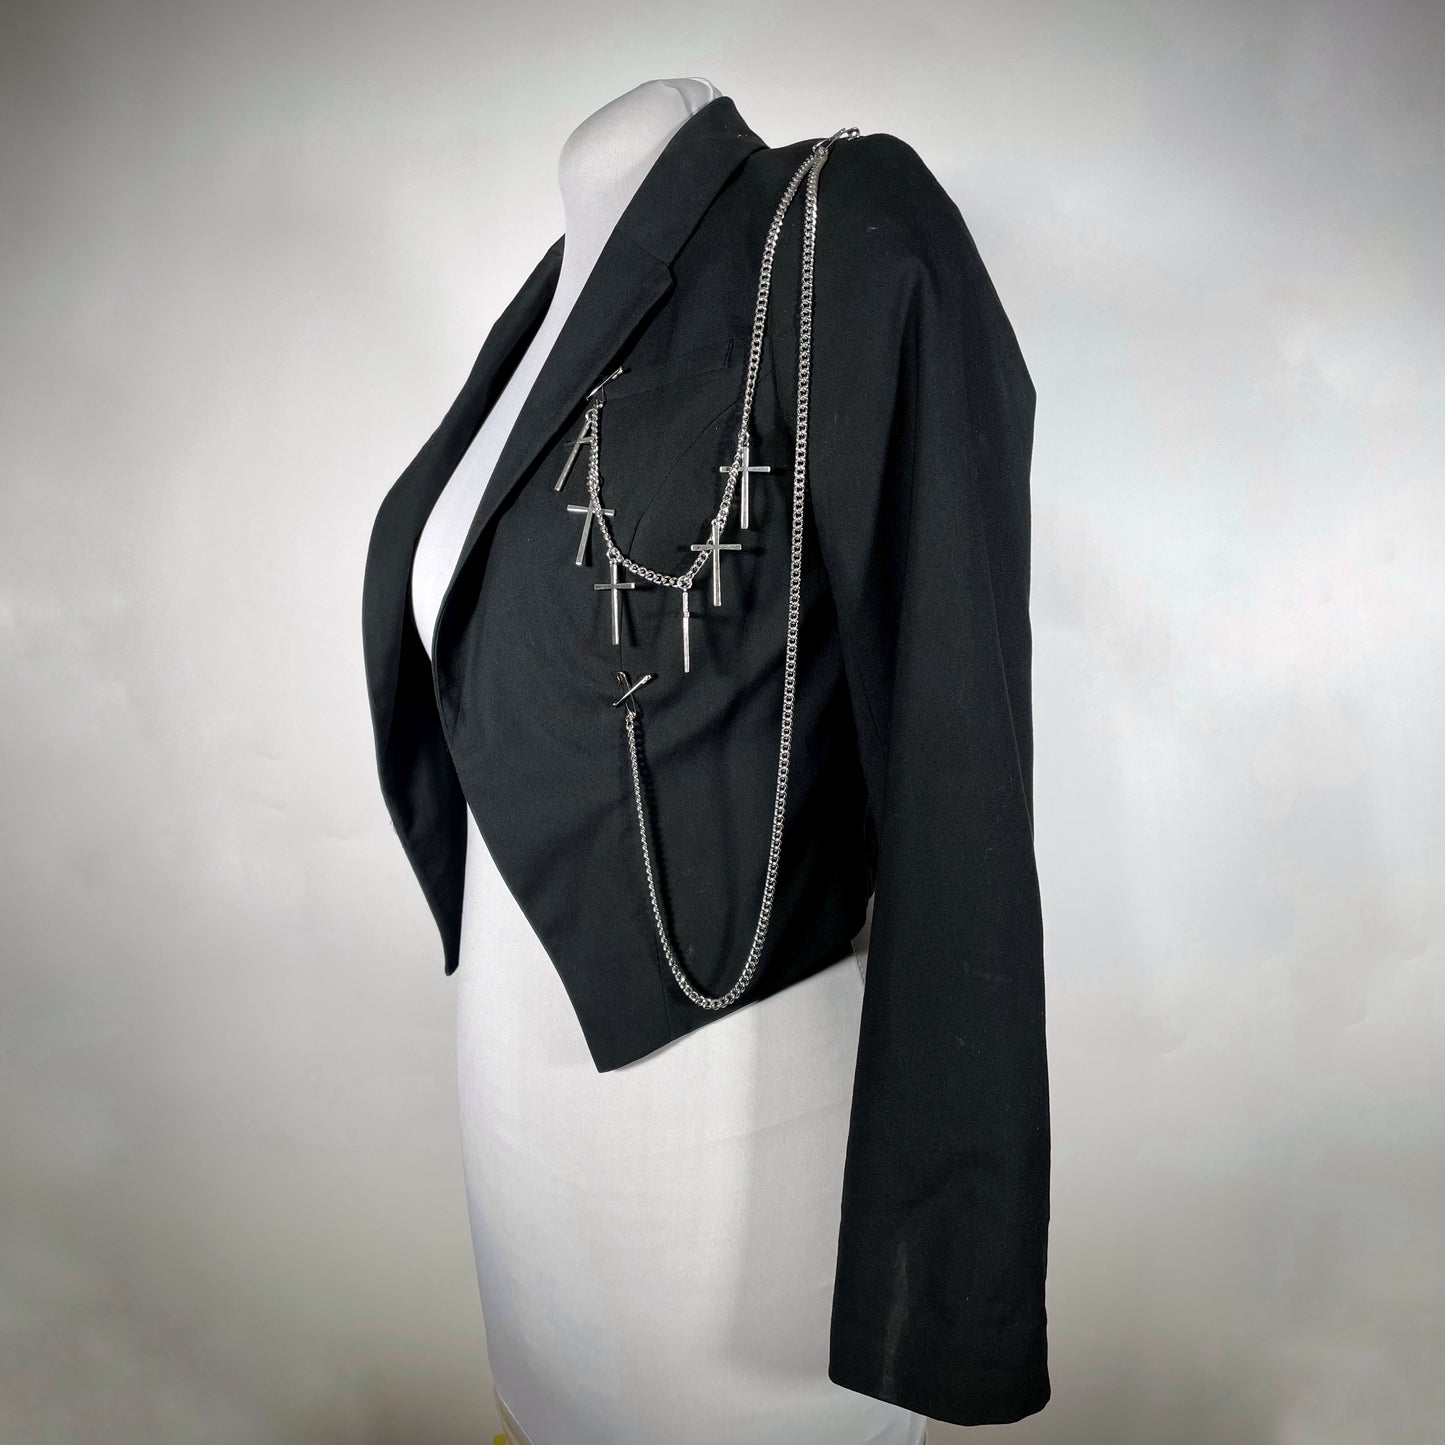 Cropped Goth Rock Blazer w/ Chain and Crosses